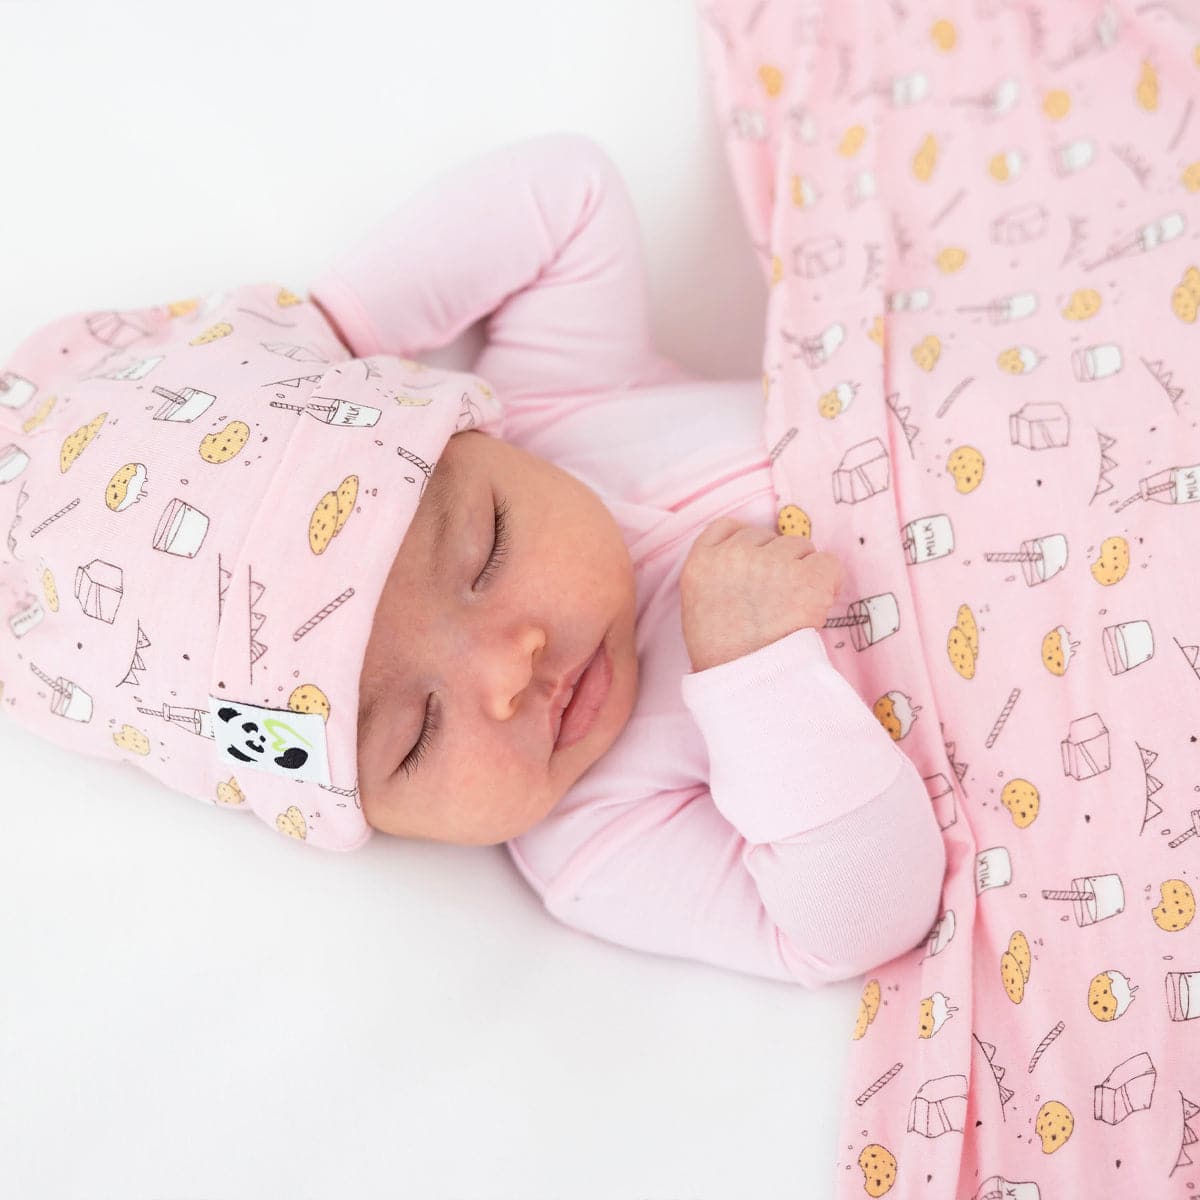 bamboo baby convertible footie, baby pajamas, bamboo sleepers, bamboo baby sleepwear, bamboo baby pajamas, little sleepies pjs, bamboo footie pajamas, baby pjs, bamboo baby pjs, bamboo baby pajamas, bamboo baby clothing, bamboo long sleeve pajamas, bamboo swaddle, bamboo swaddle blanket, bamboo christmas pajamas, bamboo beanie, swaddle and beanie set, bamboo family matching pajamas, bamboo blanket, bamboo cooling blanket, double layer reversible bamboo blanket